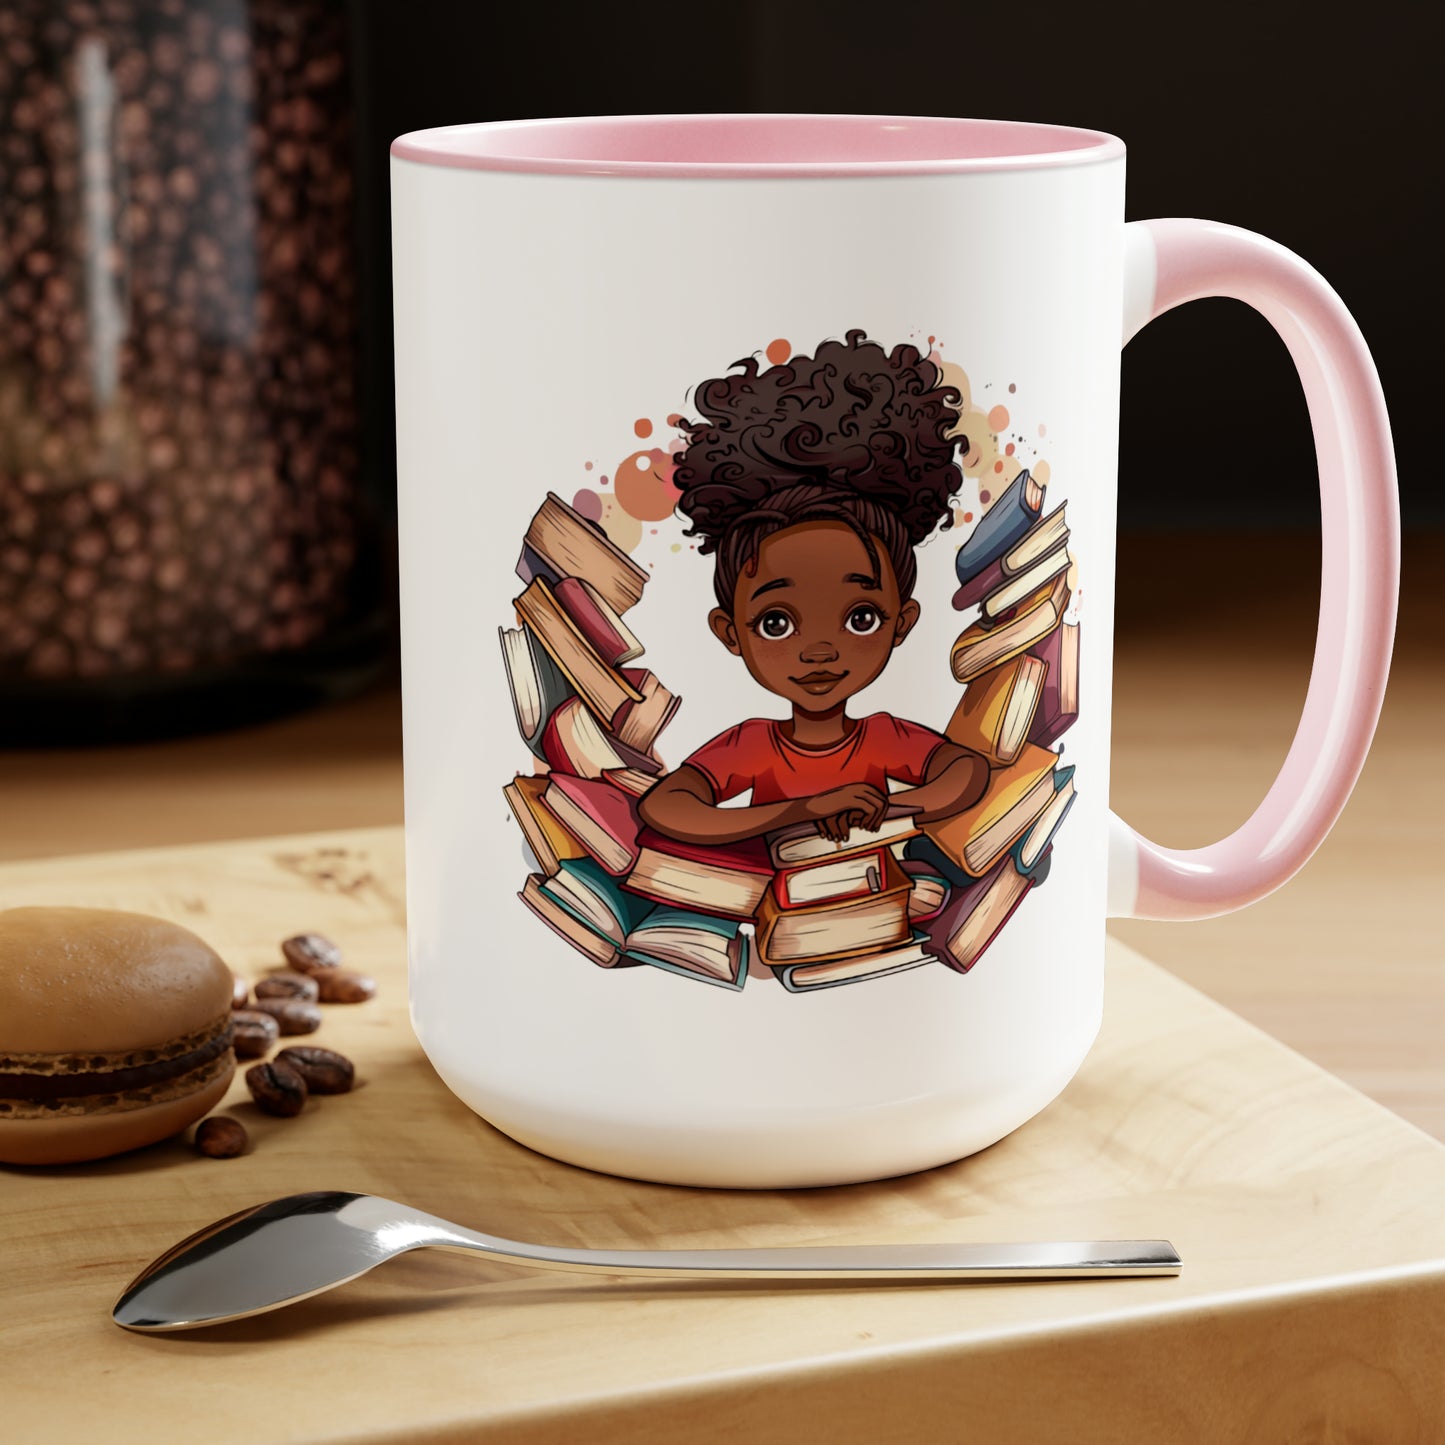 Knowledge Princess Surrounded By Books 15 oz Two-Toned Mug